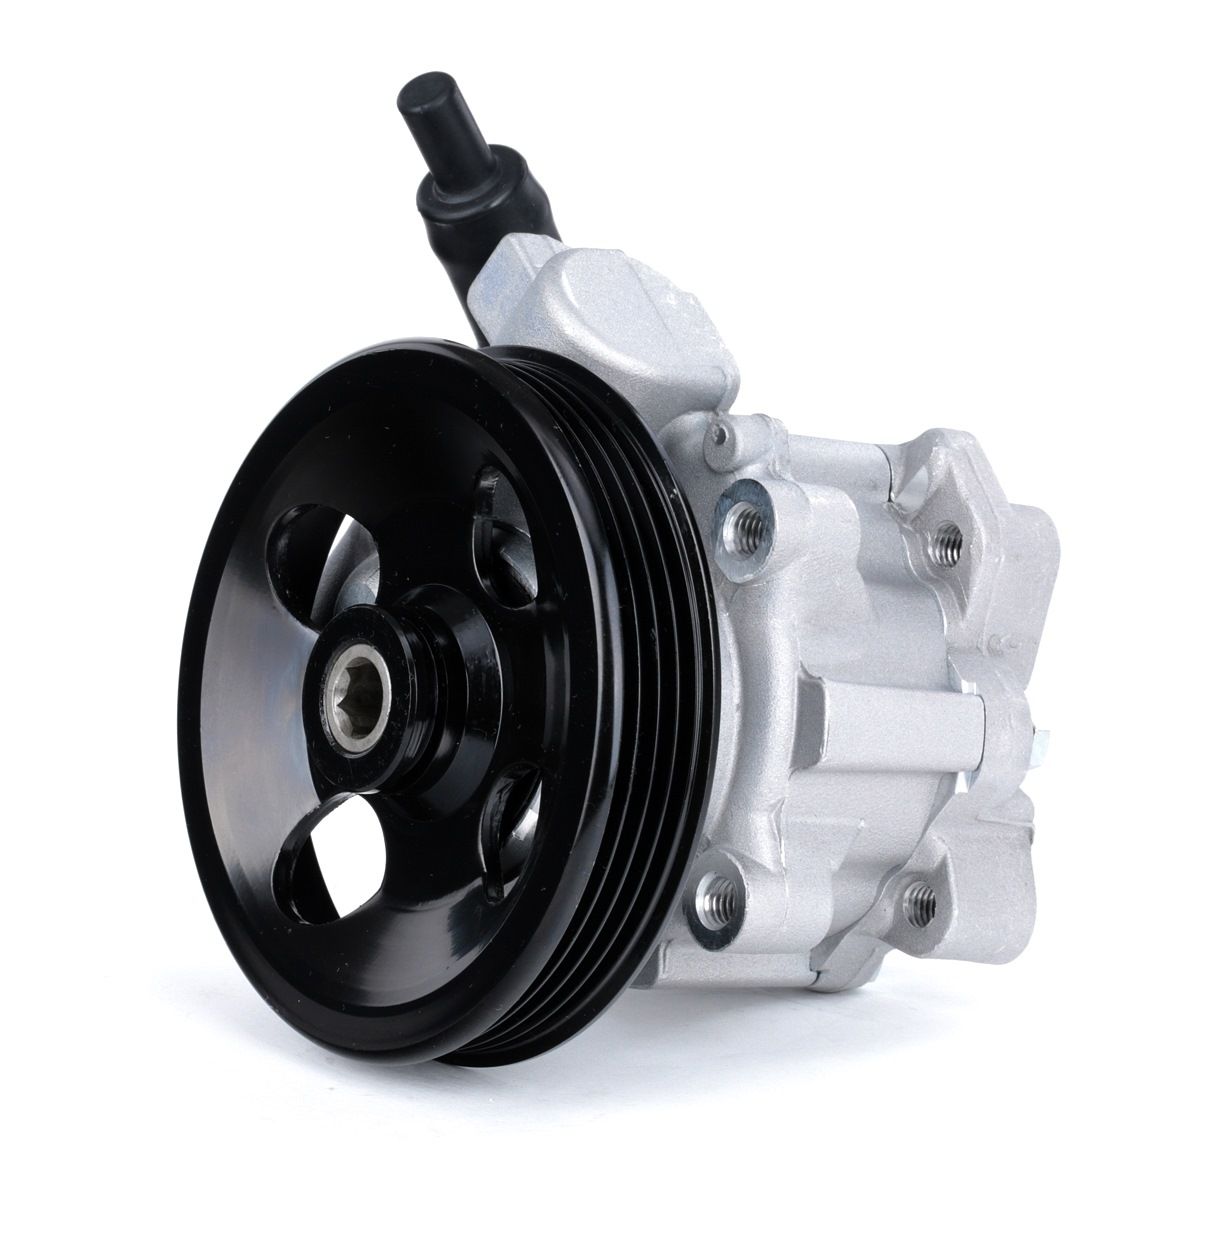 STARK SKHP-0540094 Power steering pump Hydraulic, 100 bar, Number of ribs: 4,0, Belt Pulley Ø: 108,0 mm, Clockwise rotation